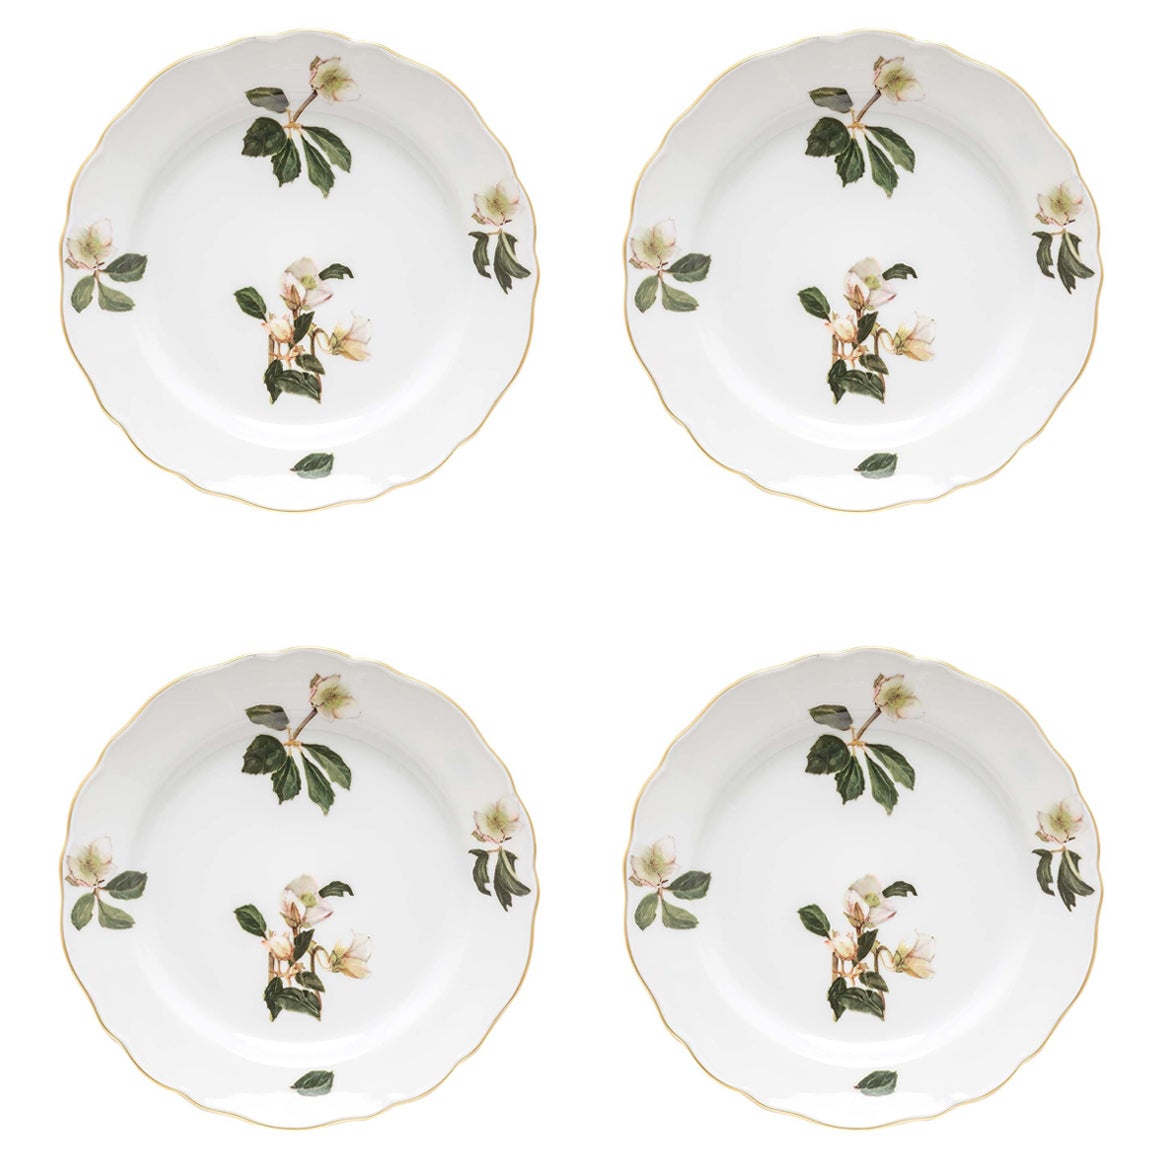 Helleborus Set of 4 Dinner Plates by Paola Caselli For Sale